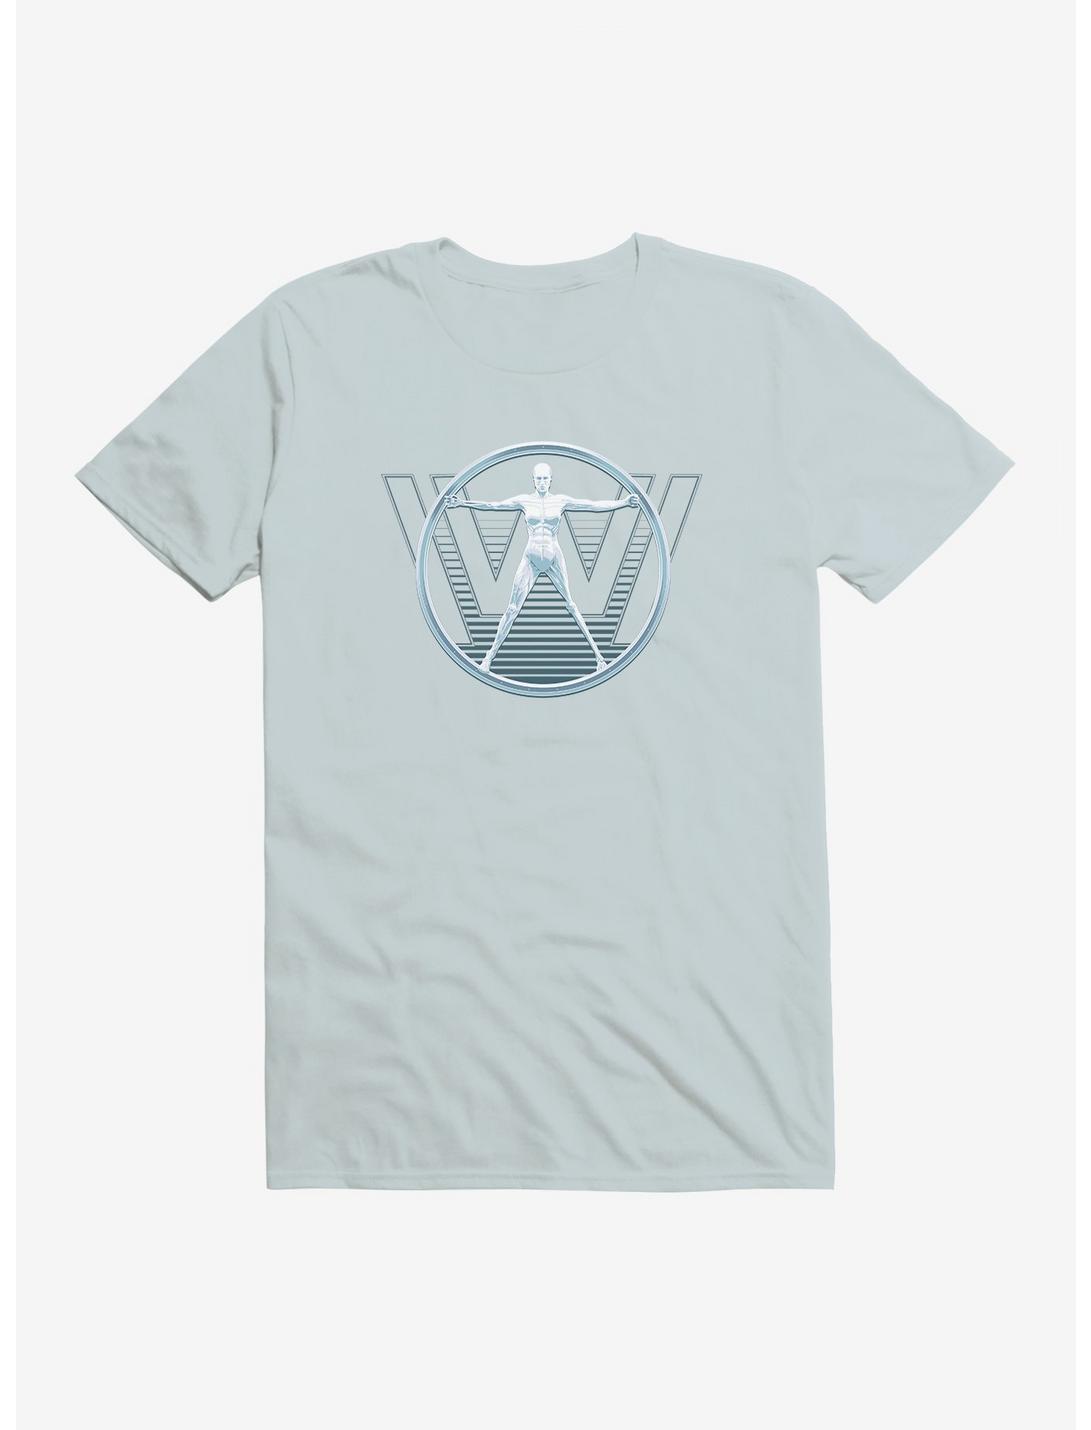 Westworld Android W Icon T-Shirt, LIGHT BLUE, hi-res